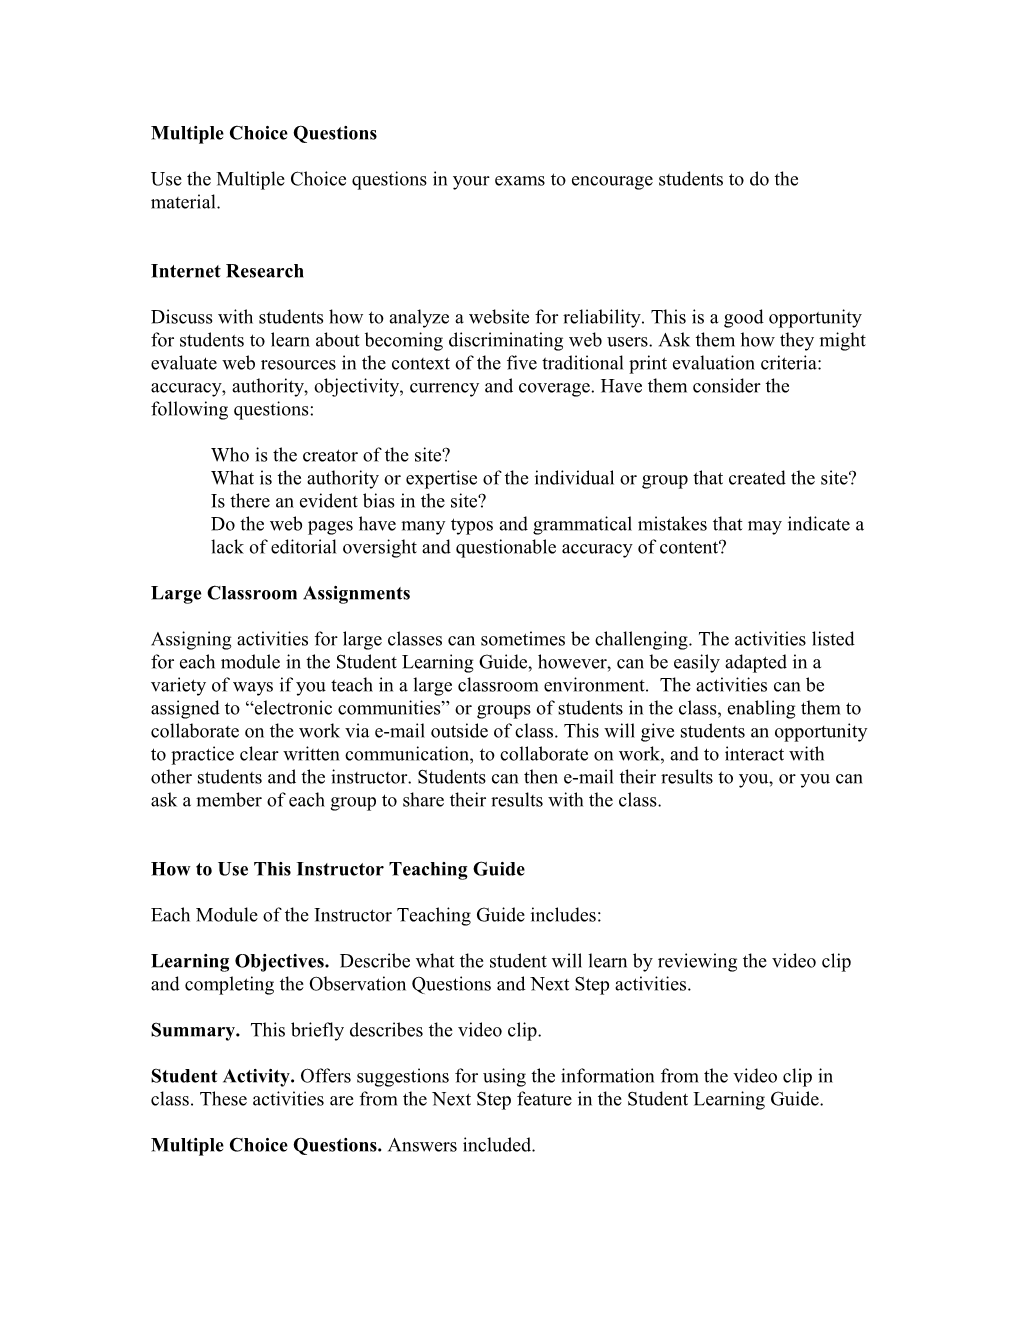 Instructor Teaching Guide for Video Workshop for Special Education P. 1